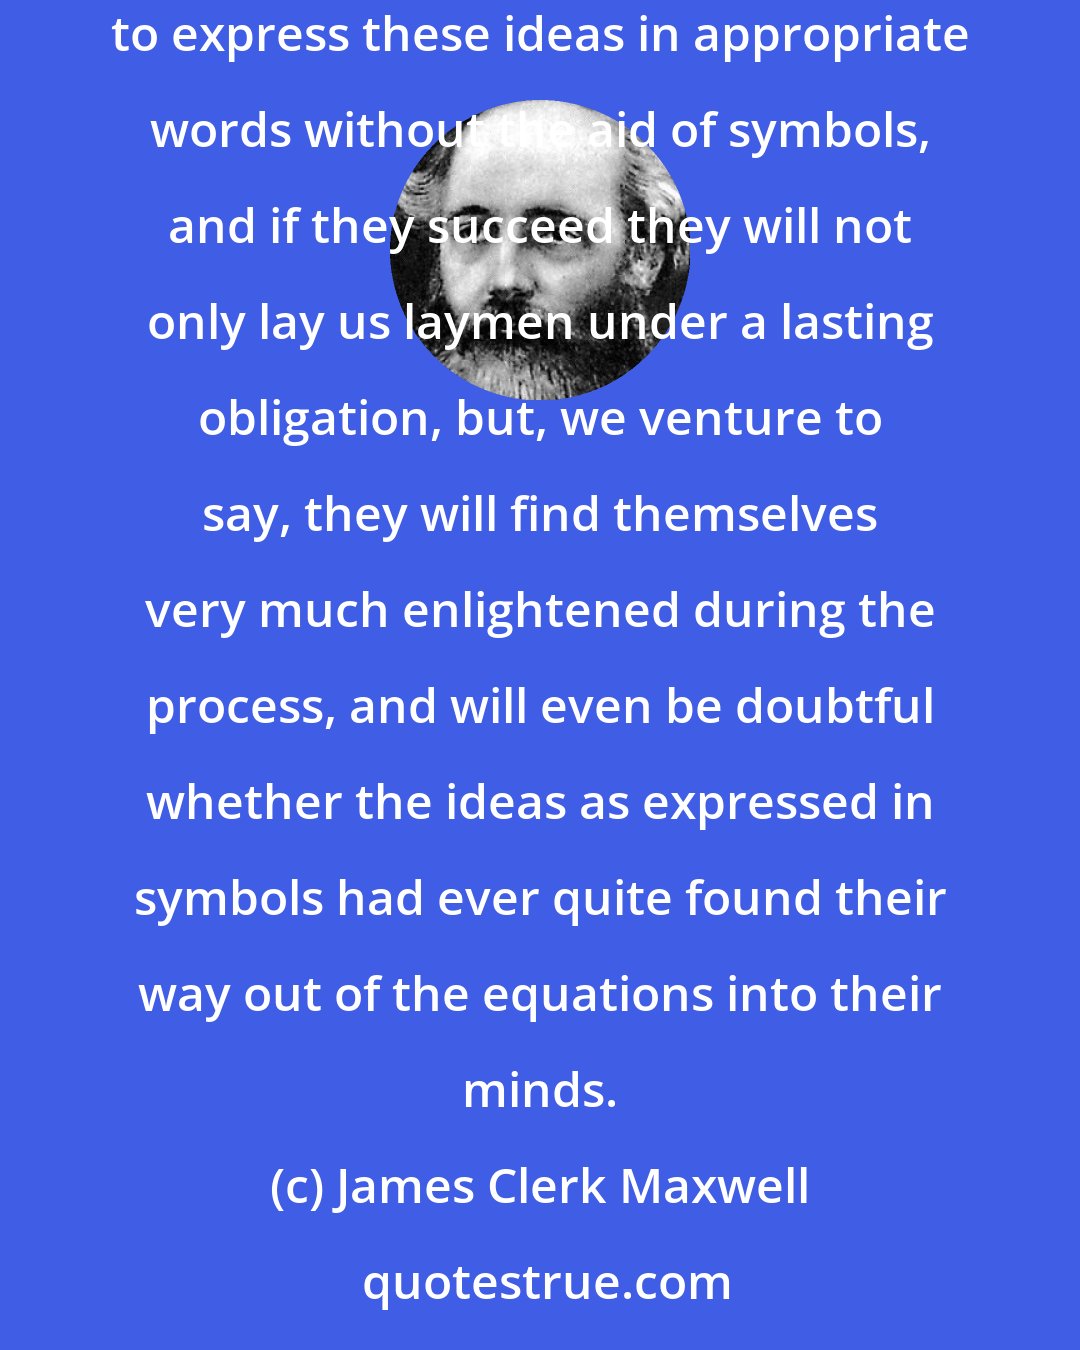 James Clerk Maxwell: Mathematicians may flatter themselves that they possess new ideas which mere human language is as yet unable to express. Let them make the effort to express these ideas in appropriate words without the aid of symbols, and if they succeed they will not only lay us laymen under a lasting obligation, but, we venture to say, they will find themselves very much enlightened during the process, and will even be doubtful whether the ideas as expressed in symbols had ever quite found their way out of the equations into their minds.